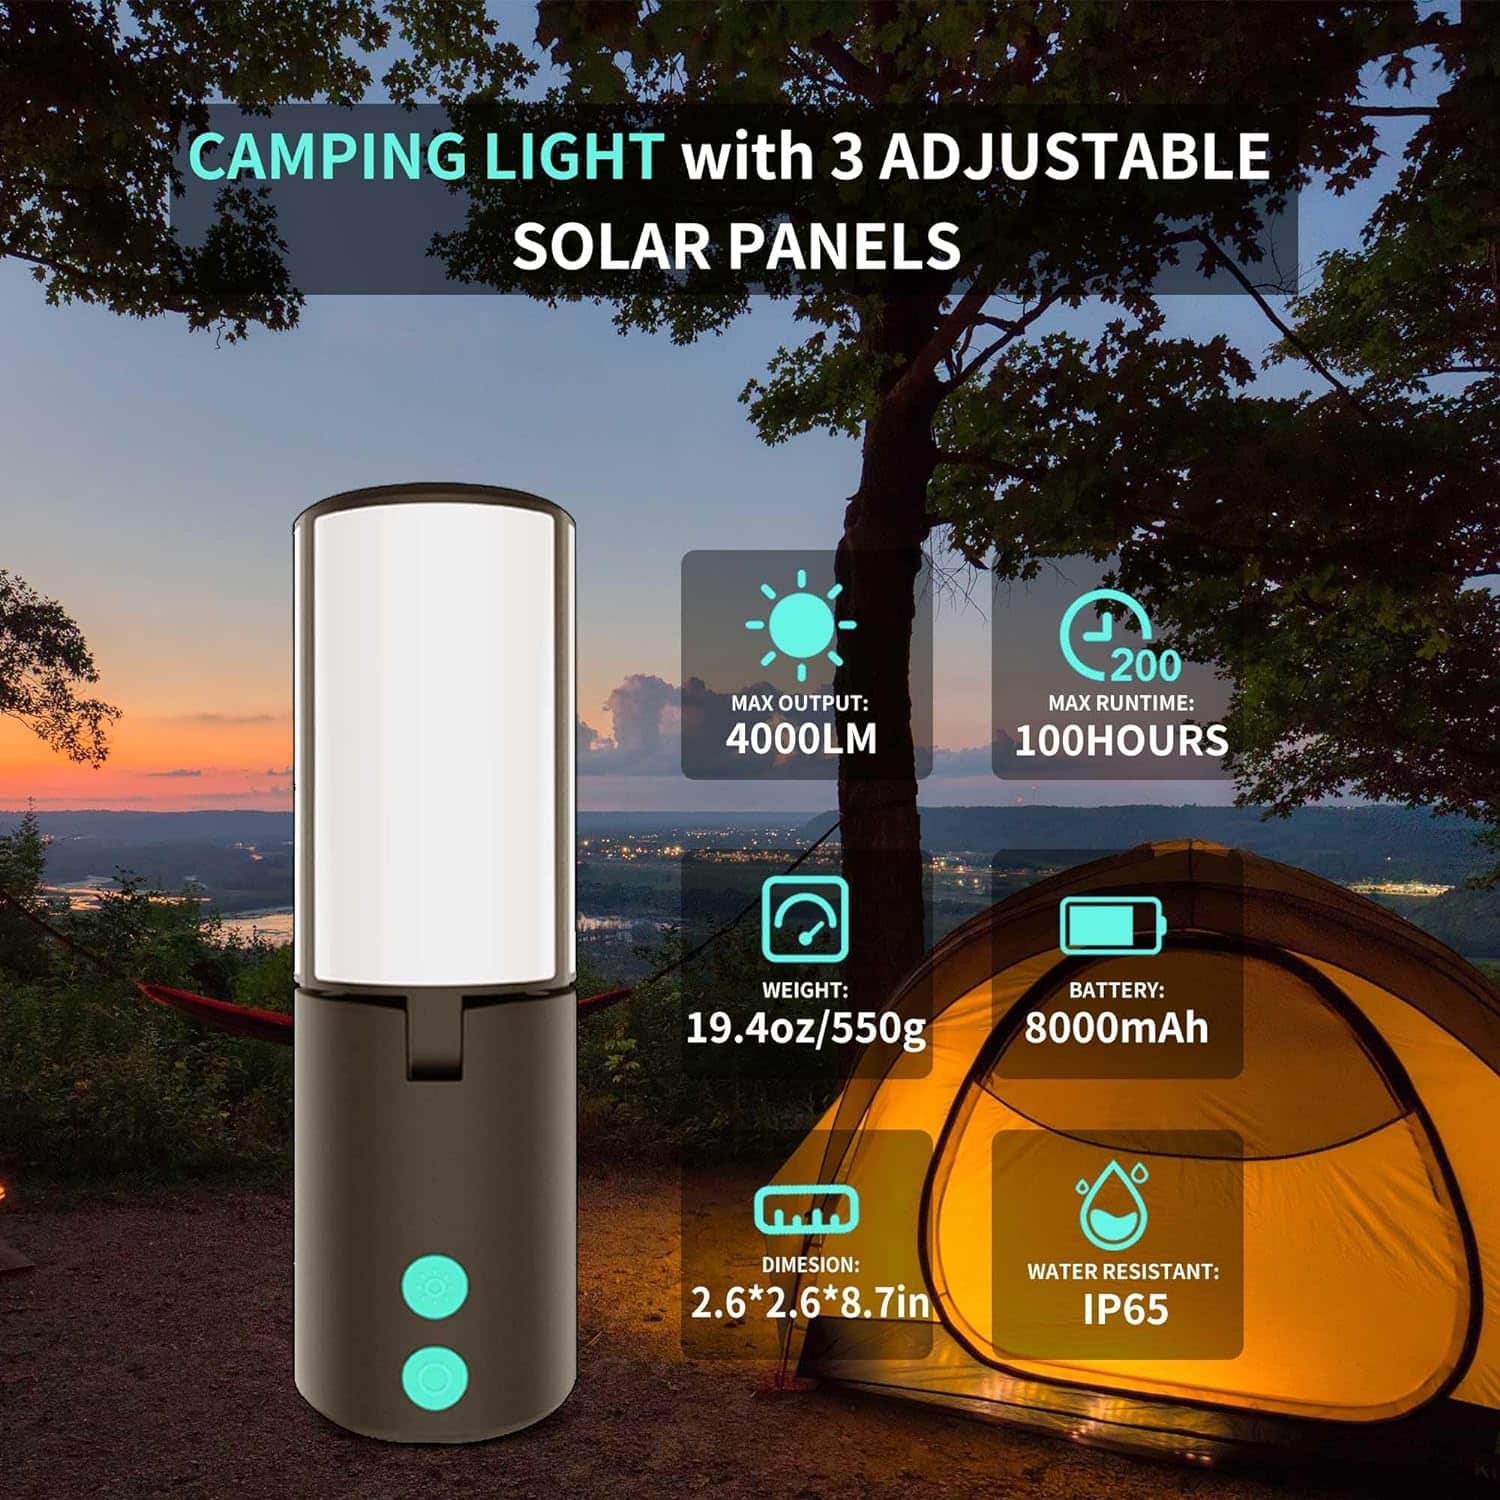 LED Camping Lantern with 3 Solar Panels, 8000mAh Rechargeable Camping Lights, 4000LM 5-in-1 Dimmable Waterproof Flashlight, Portable Lamp Lantern for Power Outages, Hanging Tent, Hurricane, Emergency